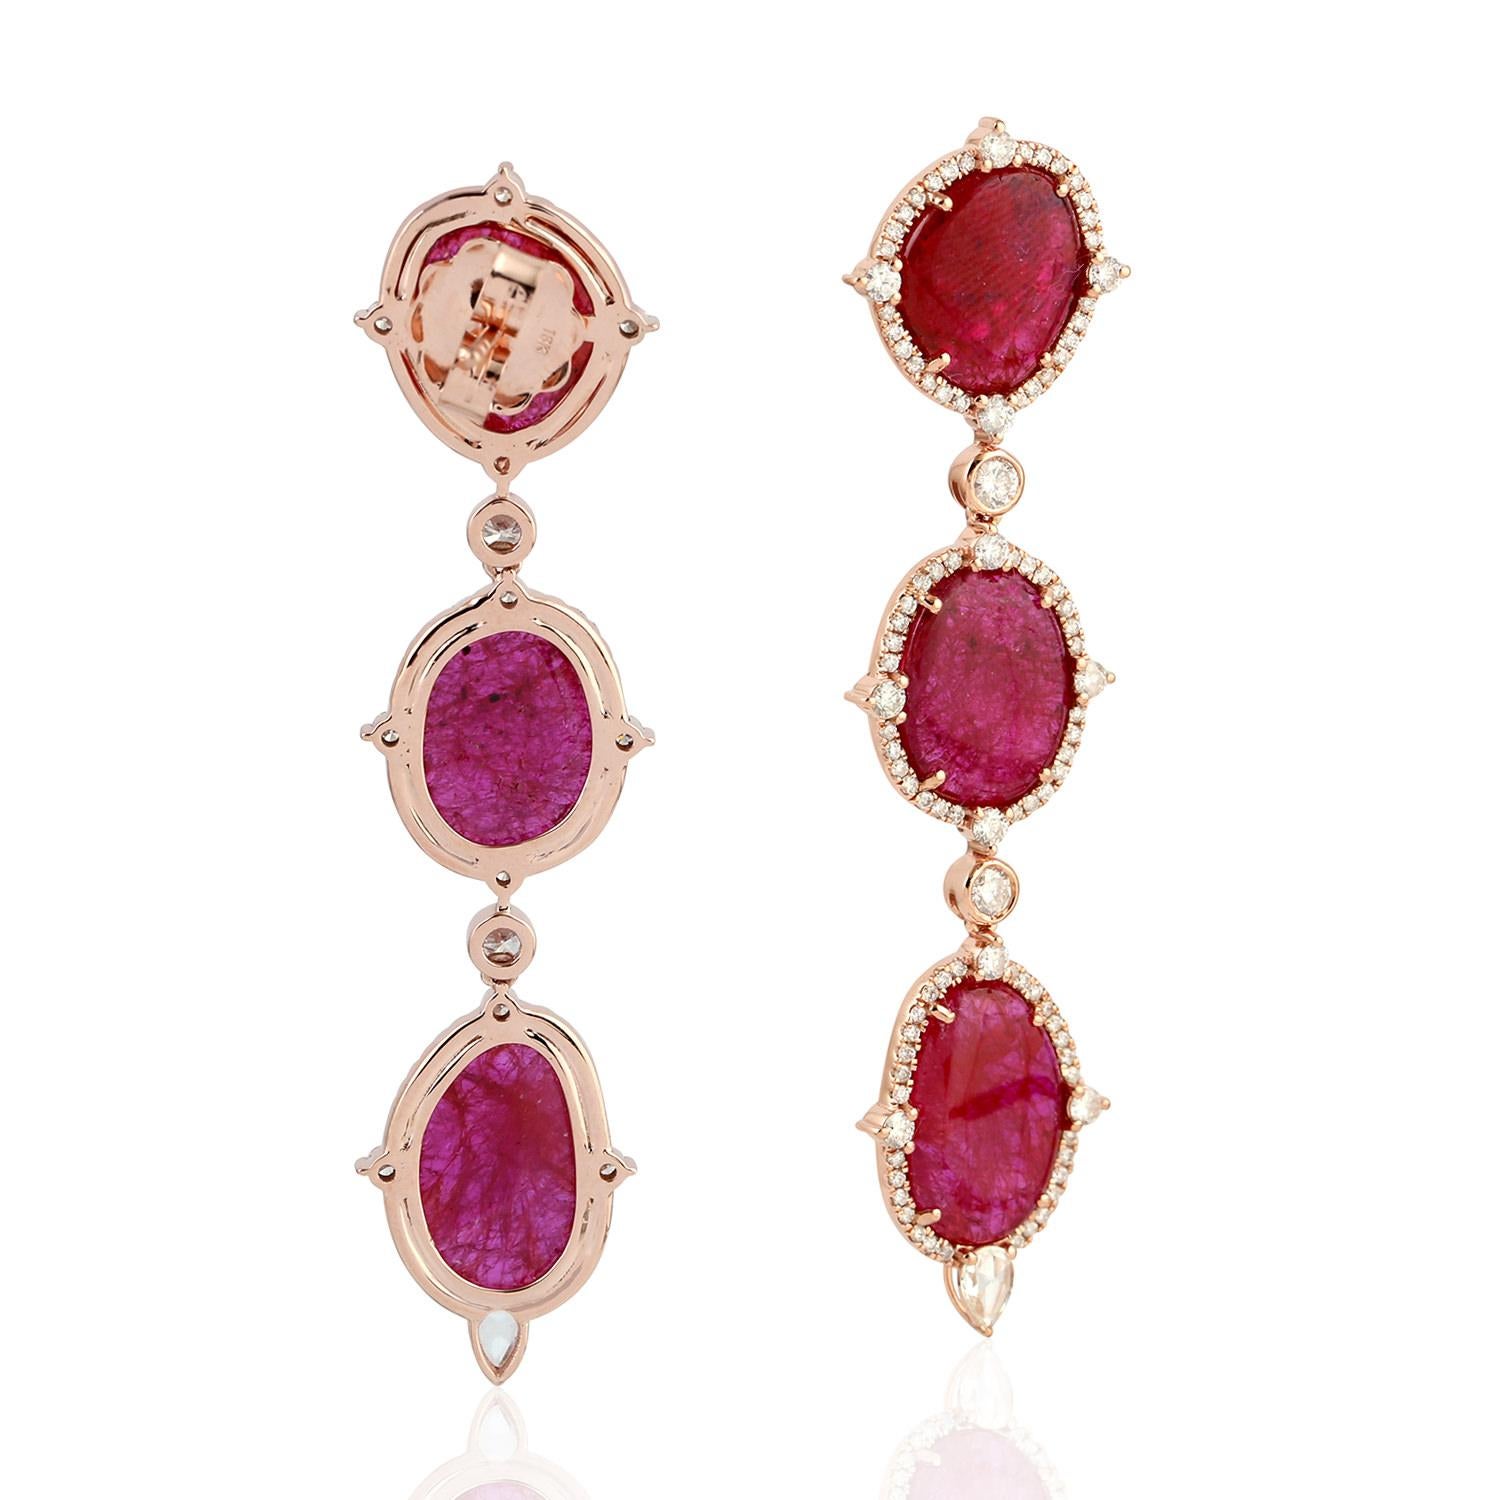 18KT:10.807g,D:1.94ct, Ruby:21.34ct,